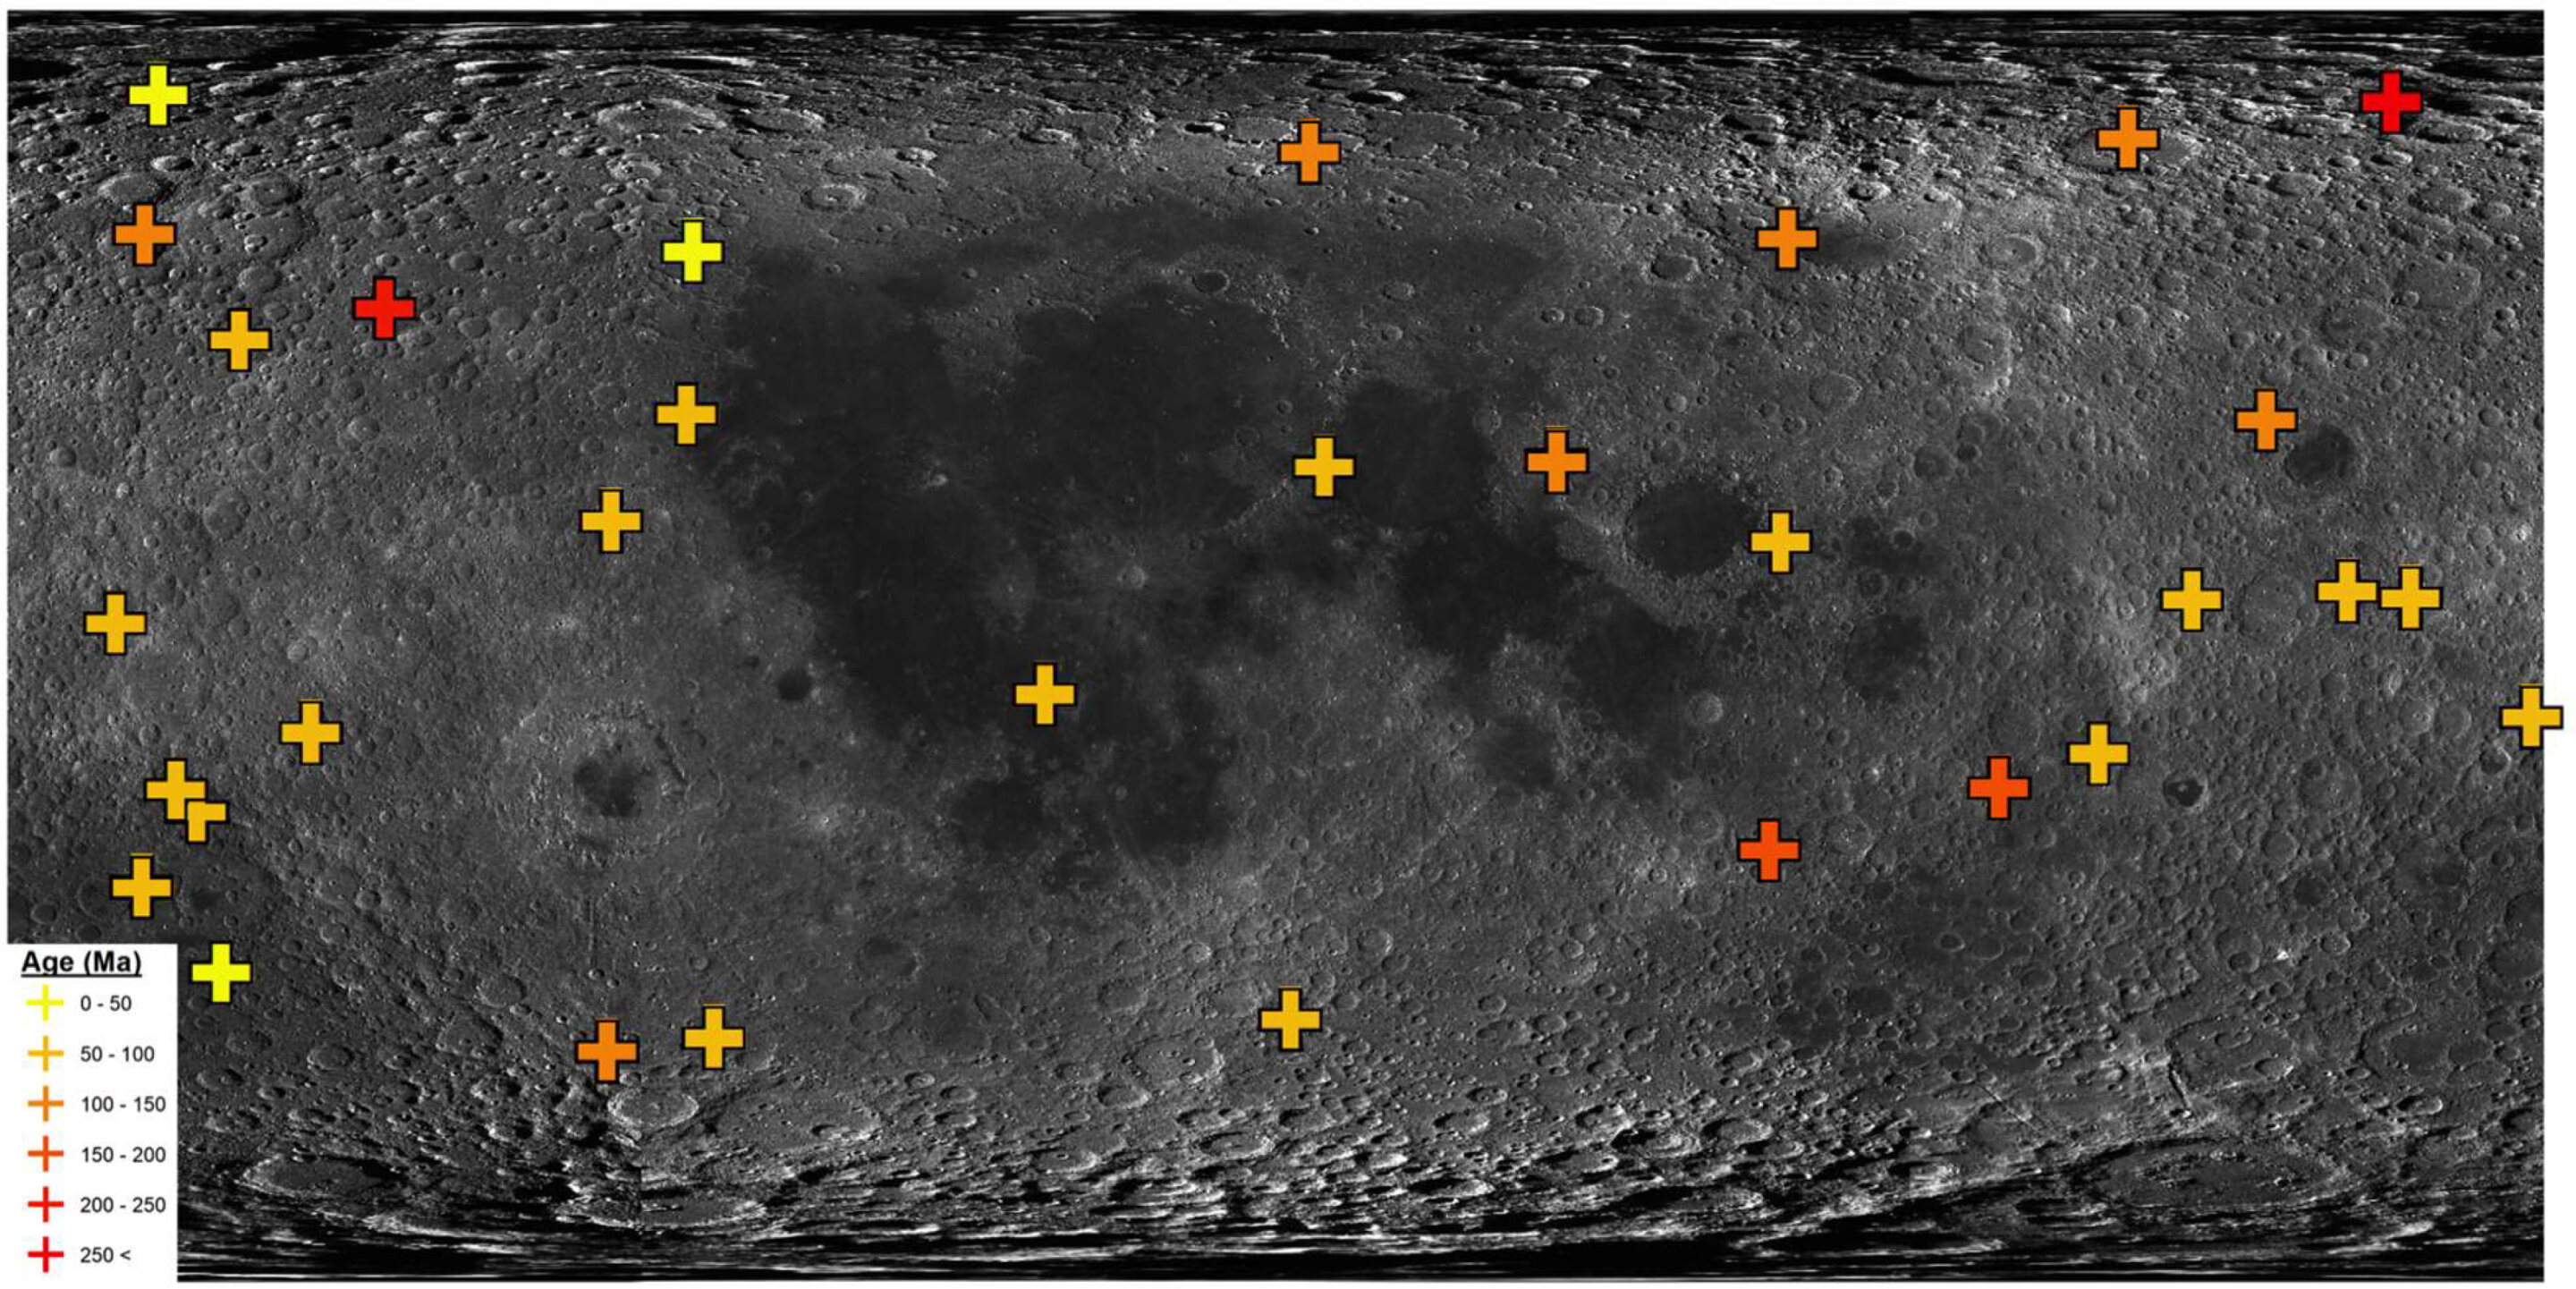 Lunar landforms indicate geologically recent seismic activity on the Moon